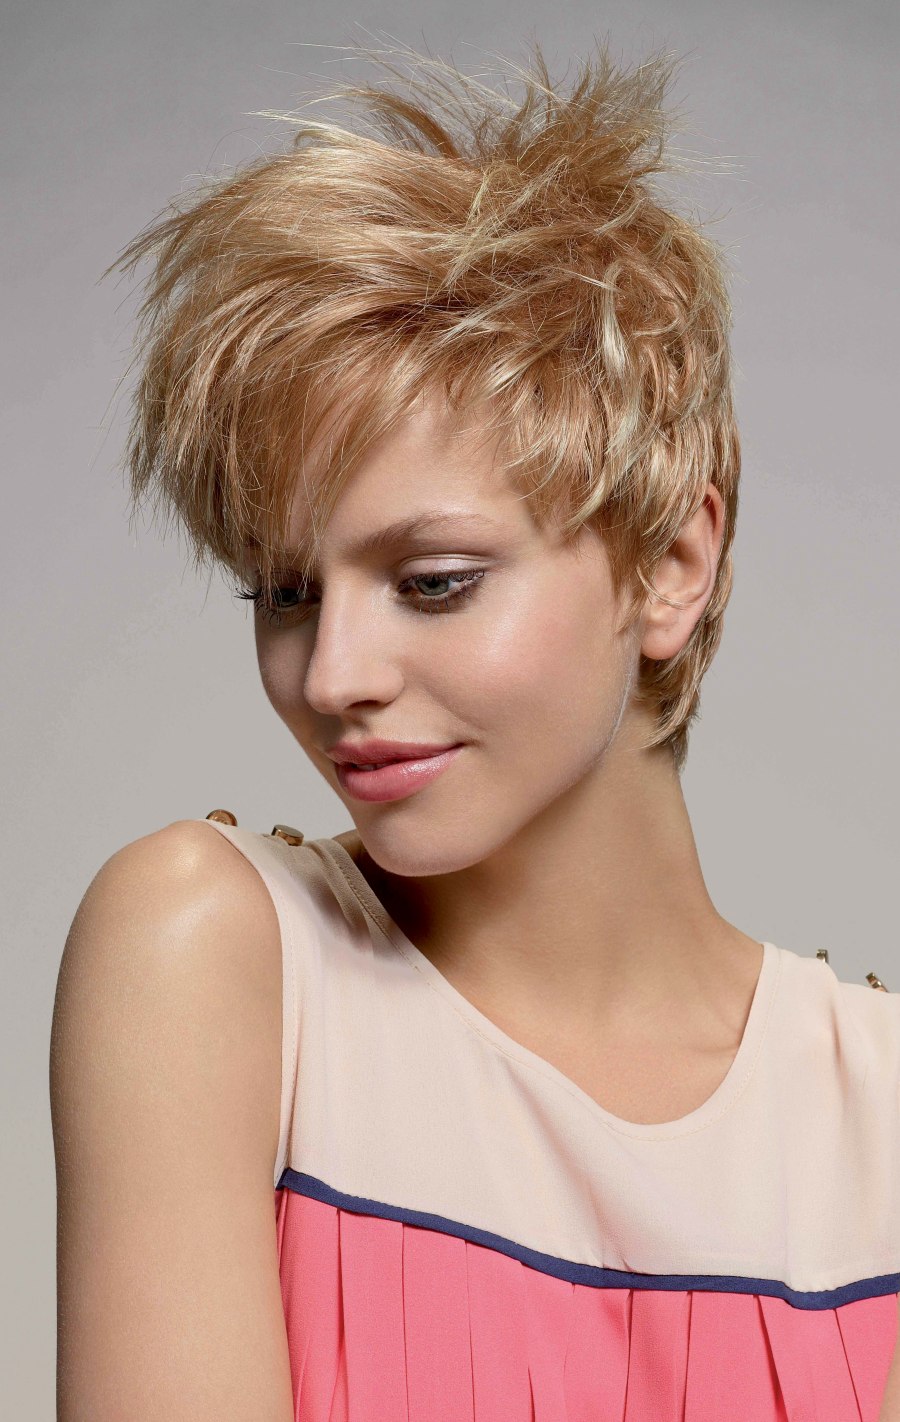 Practical short hairstyles | Easy short pixie cut and a curly bob